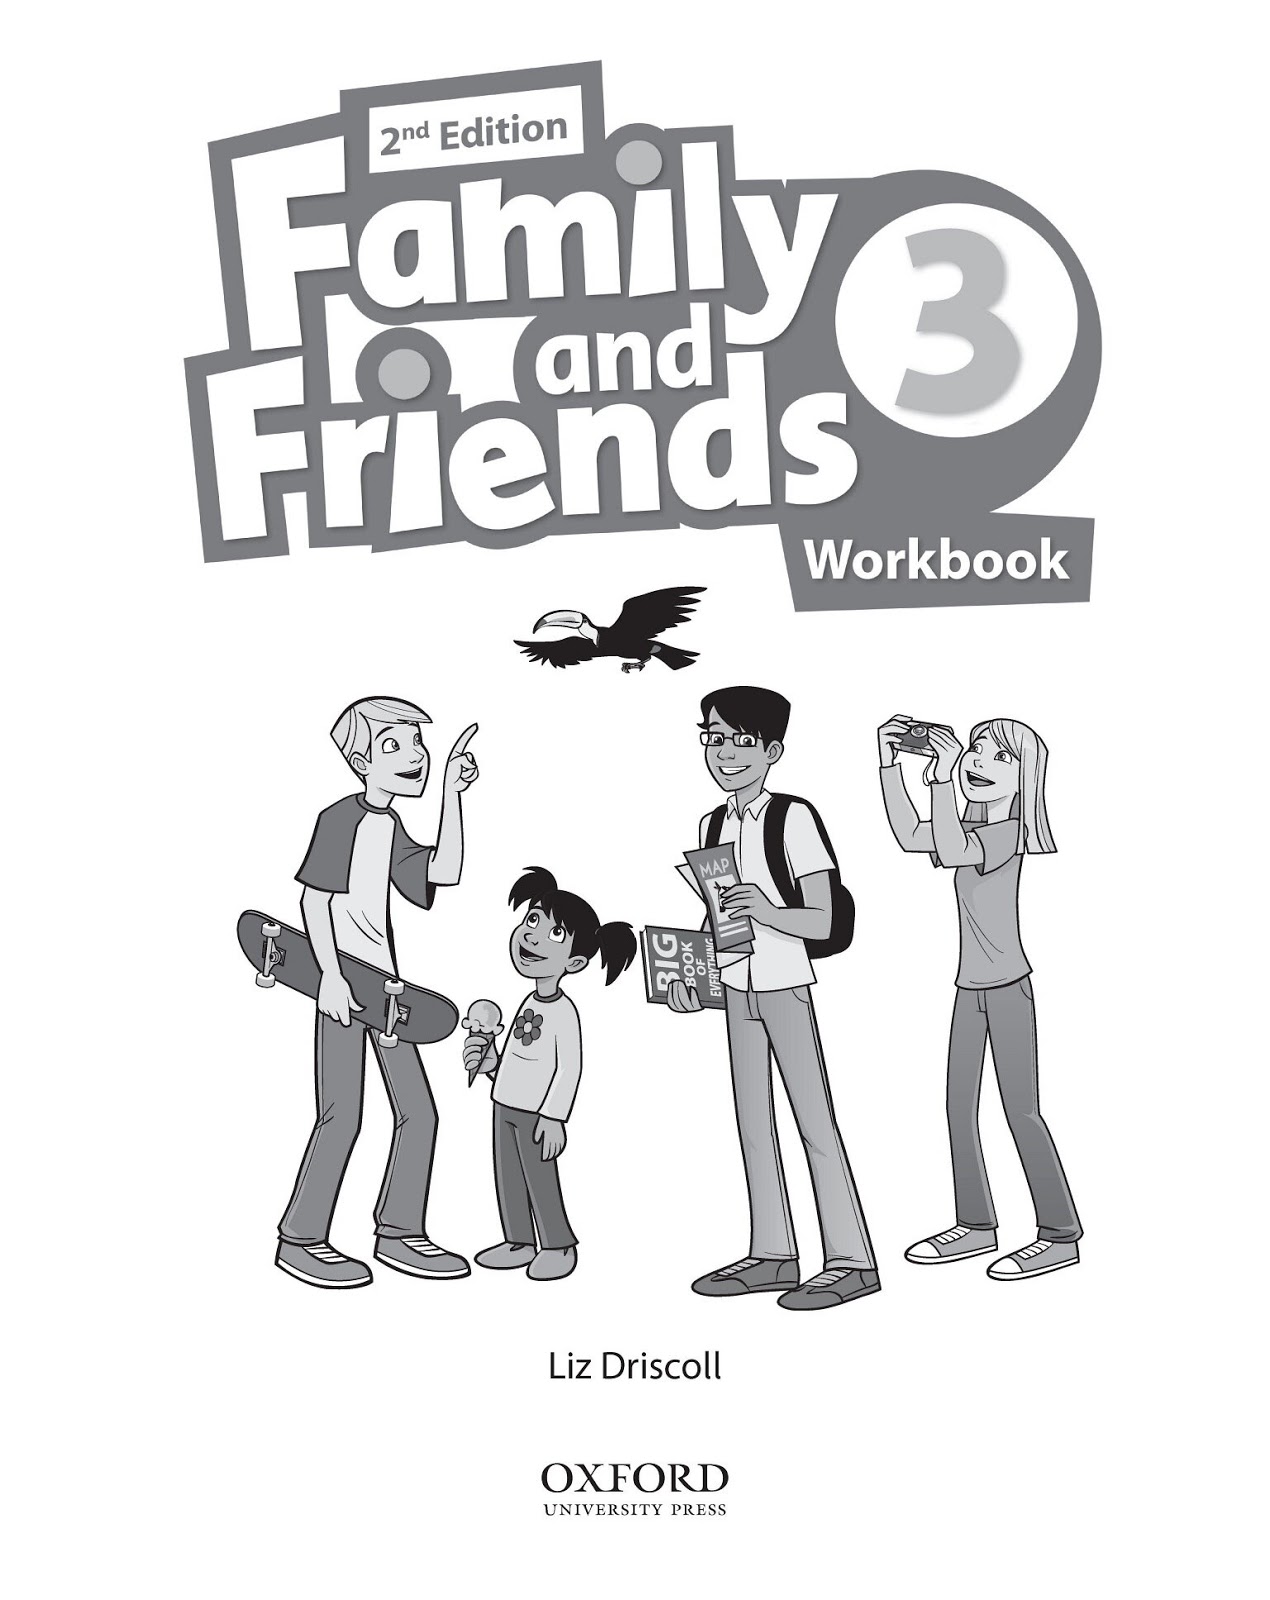 Family and friends 4 2nd edition workbook. Family and friends 3 Workbook Оксфорд Liz Driscoll. Family and friends 2. Workbook. Family and friends 3 Workbook. Family and friends 4 class book.